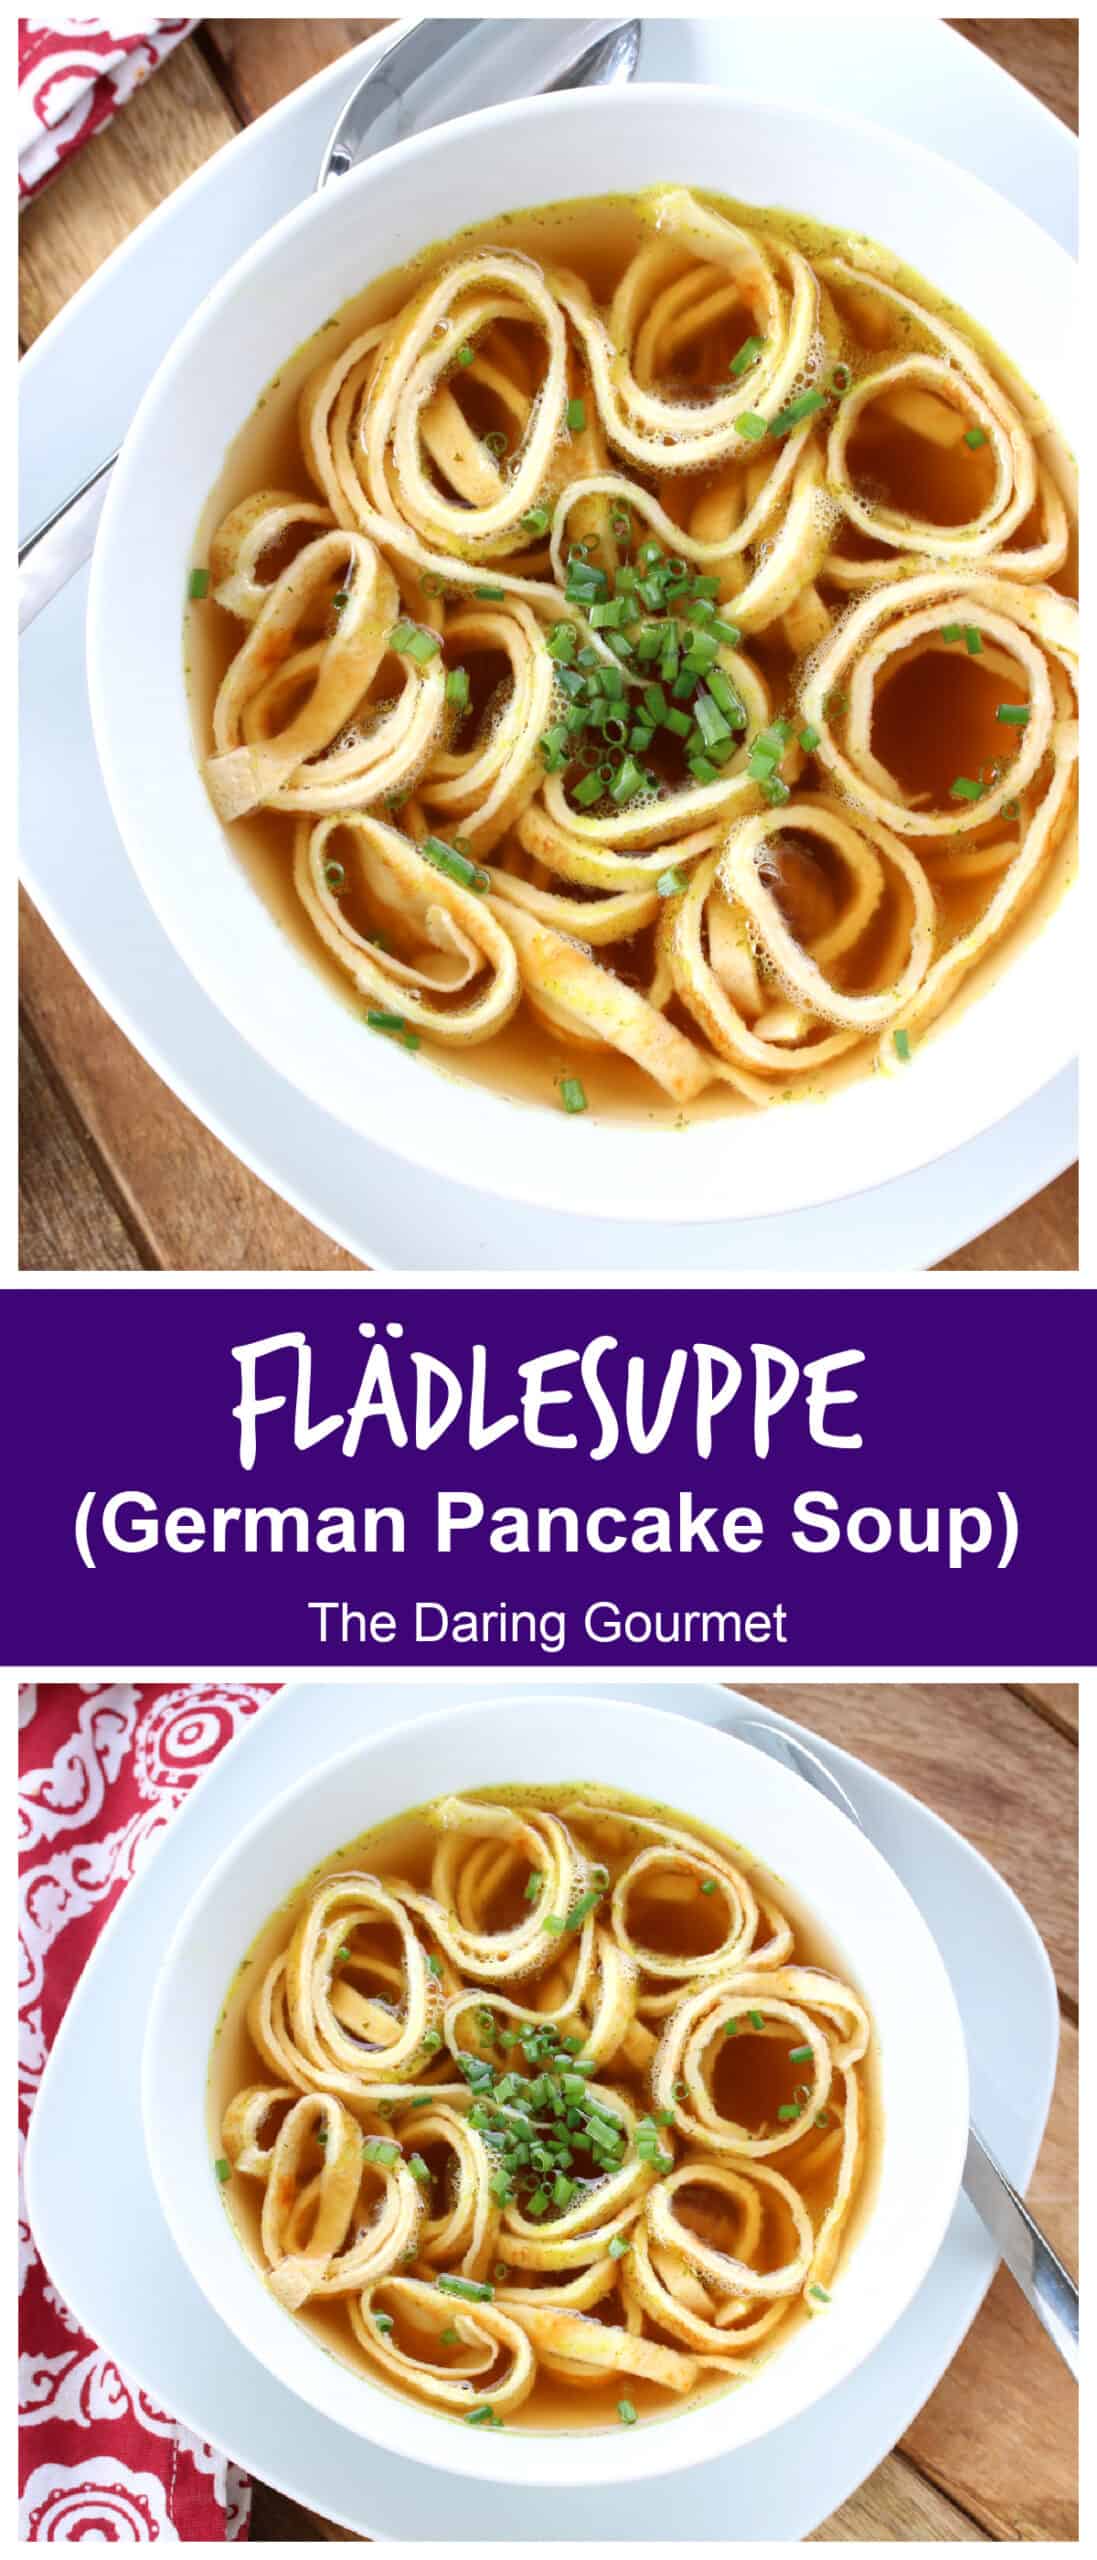 flaedlesuppe recipe authentic German pancake soup beef broth